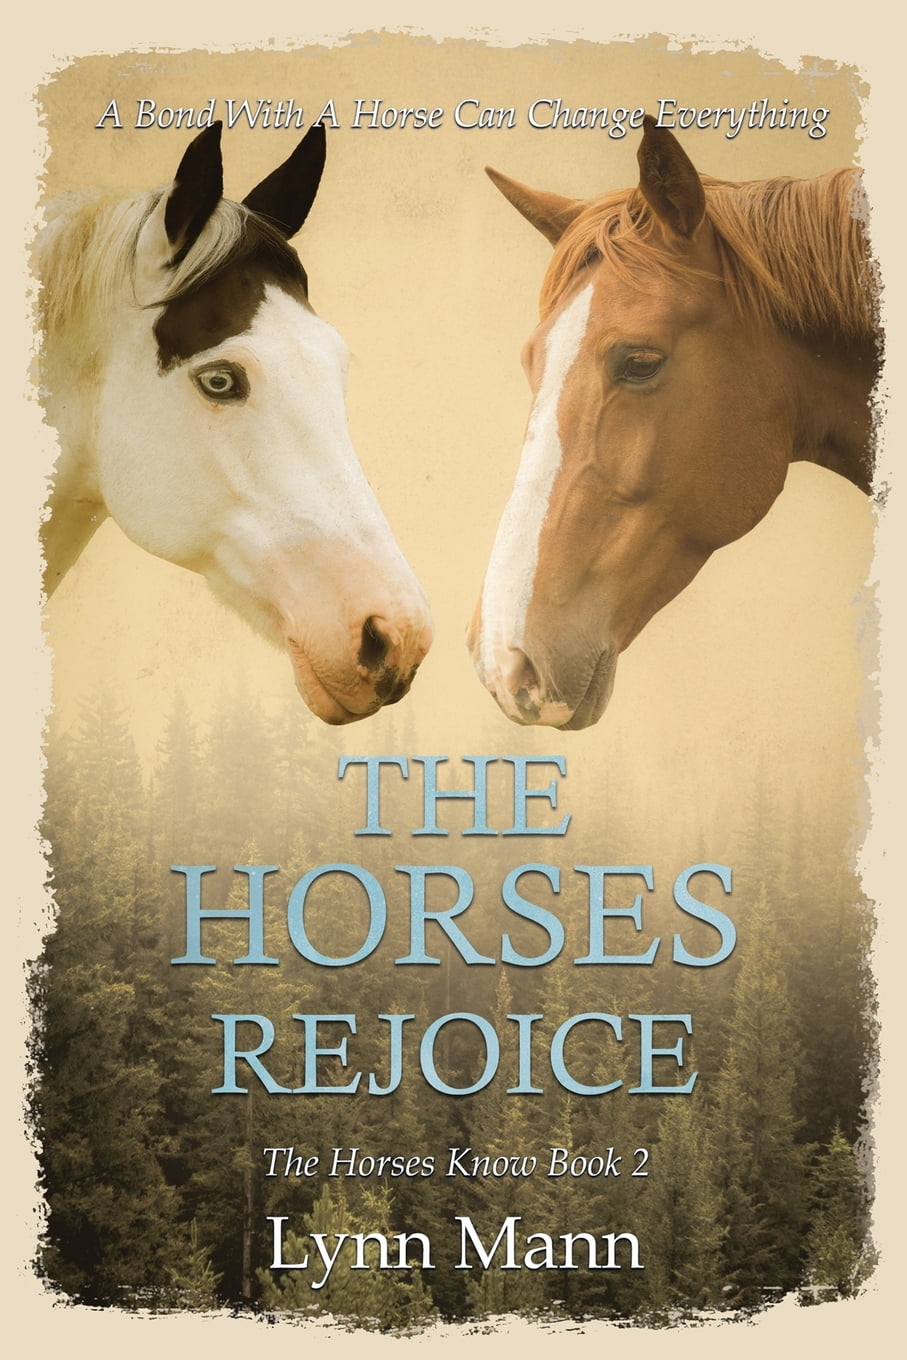 book review for horse